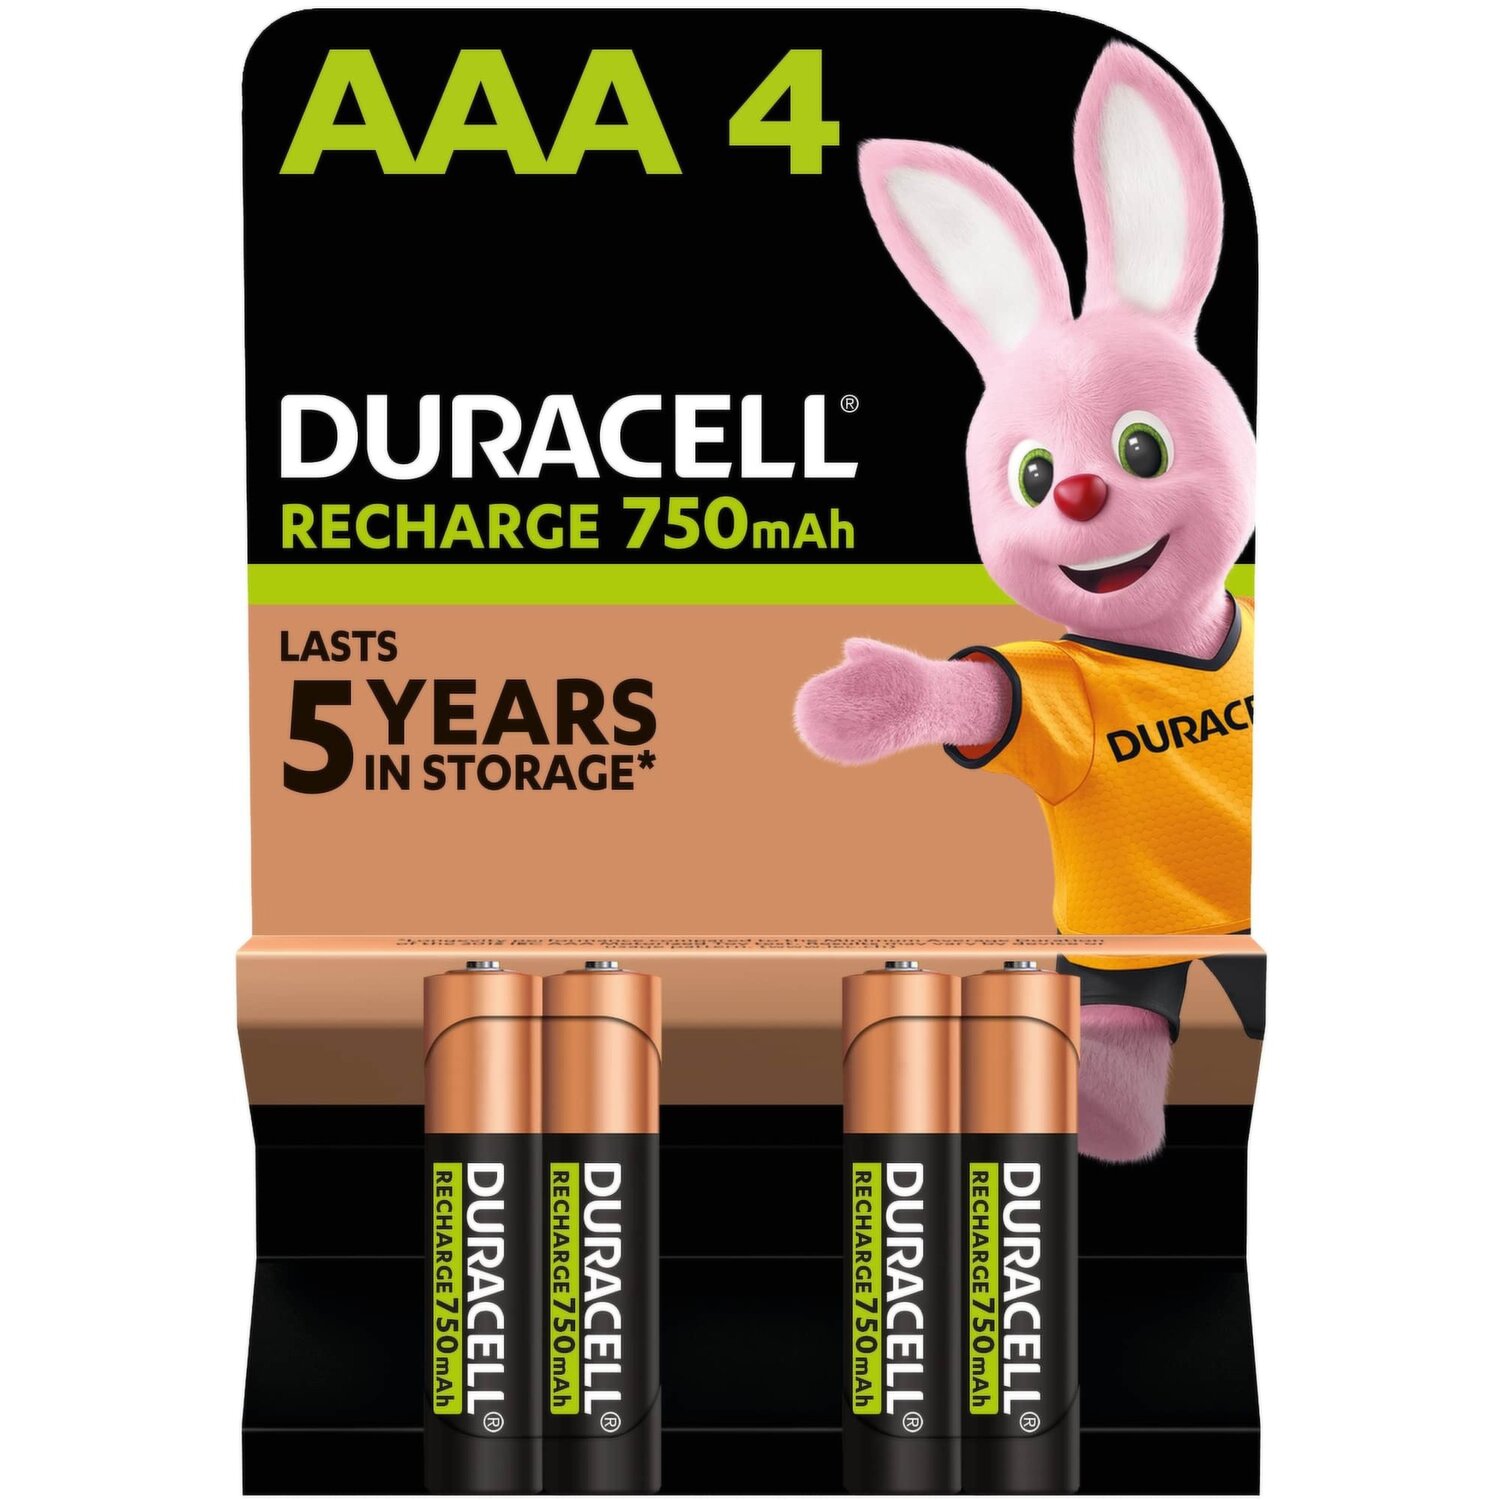 Duracell 4 Rechargeable 750mAh AAA Batteries - Dunnes Stores